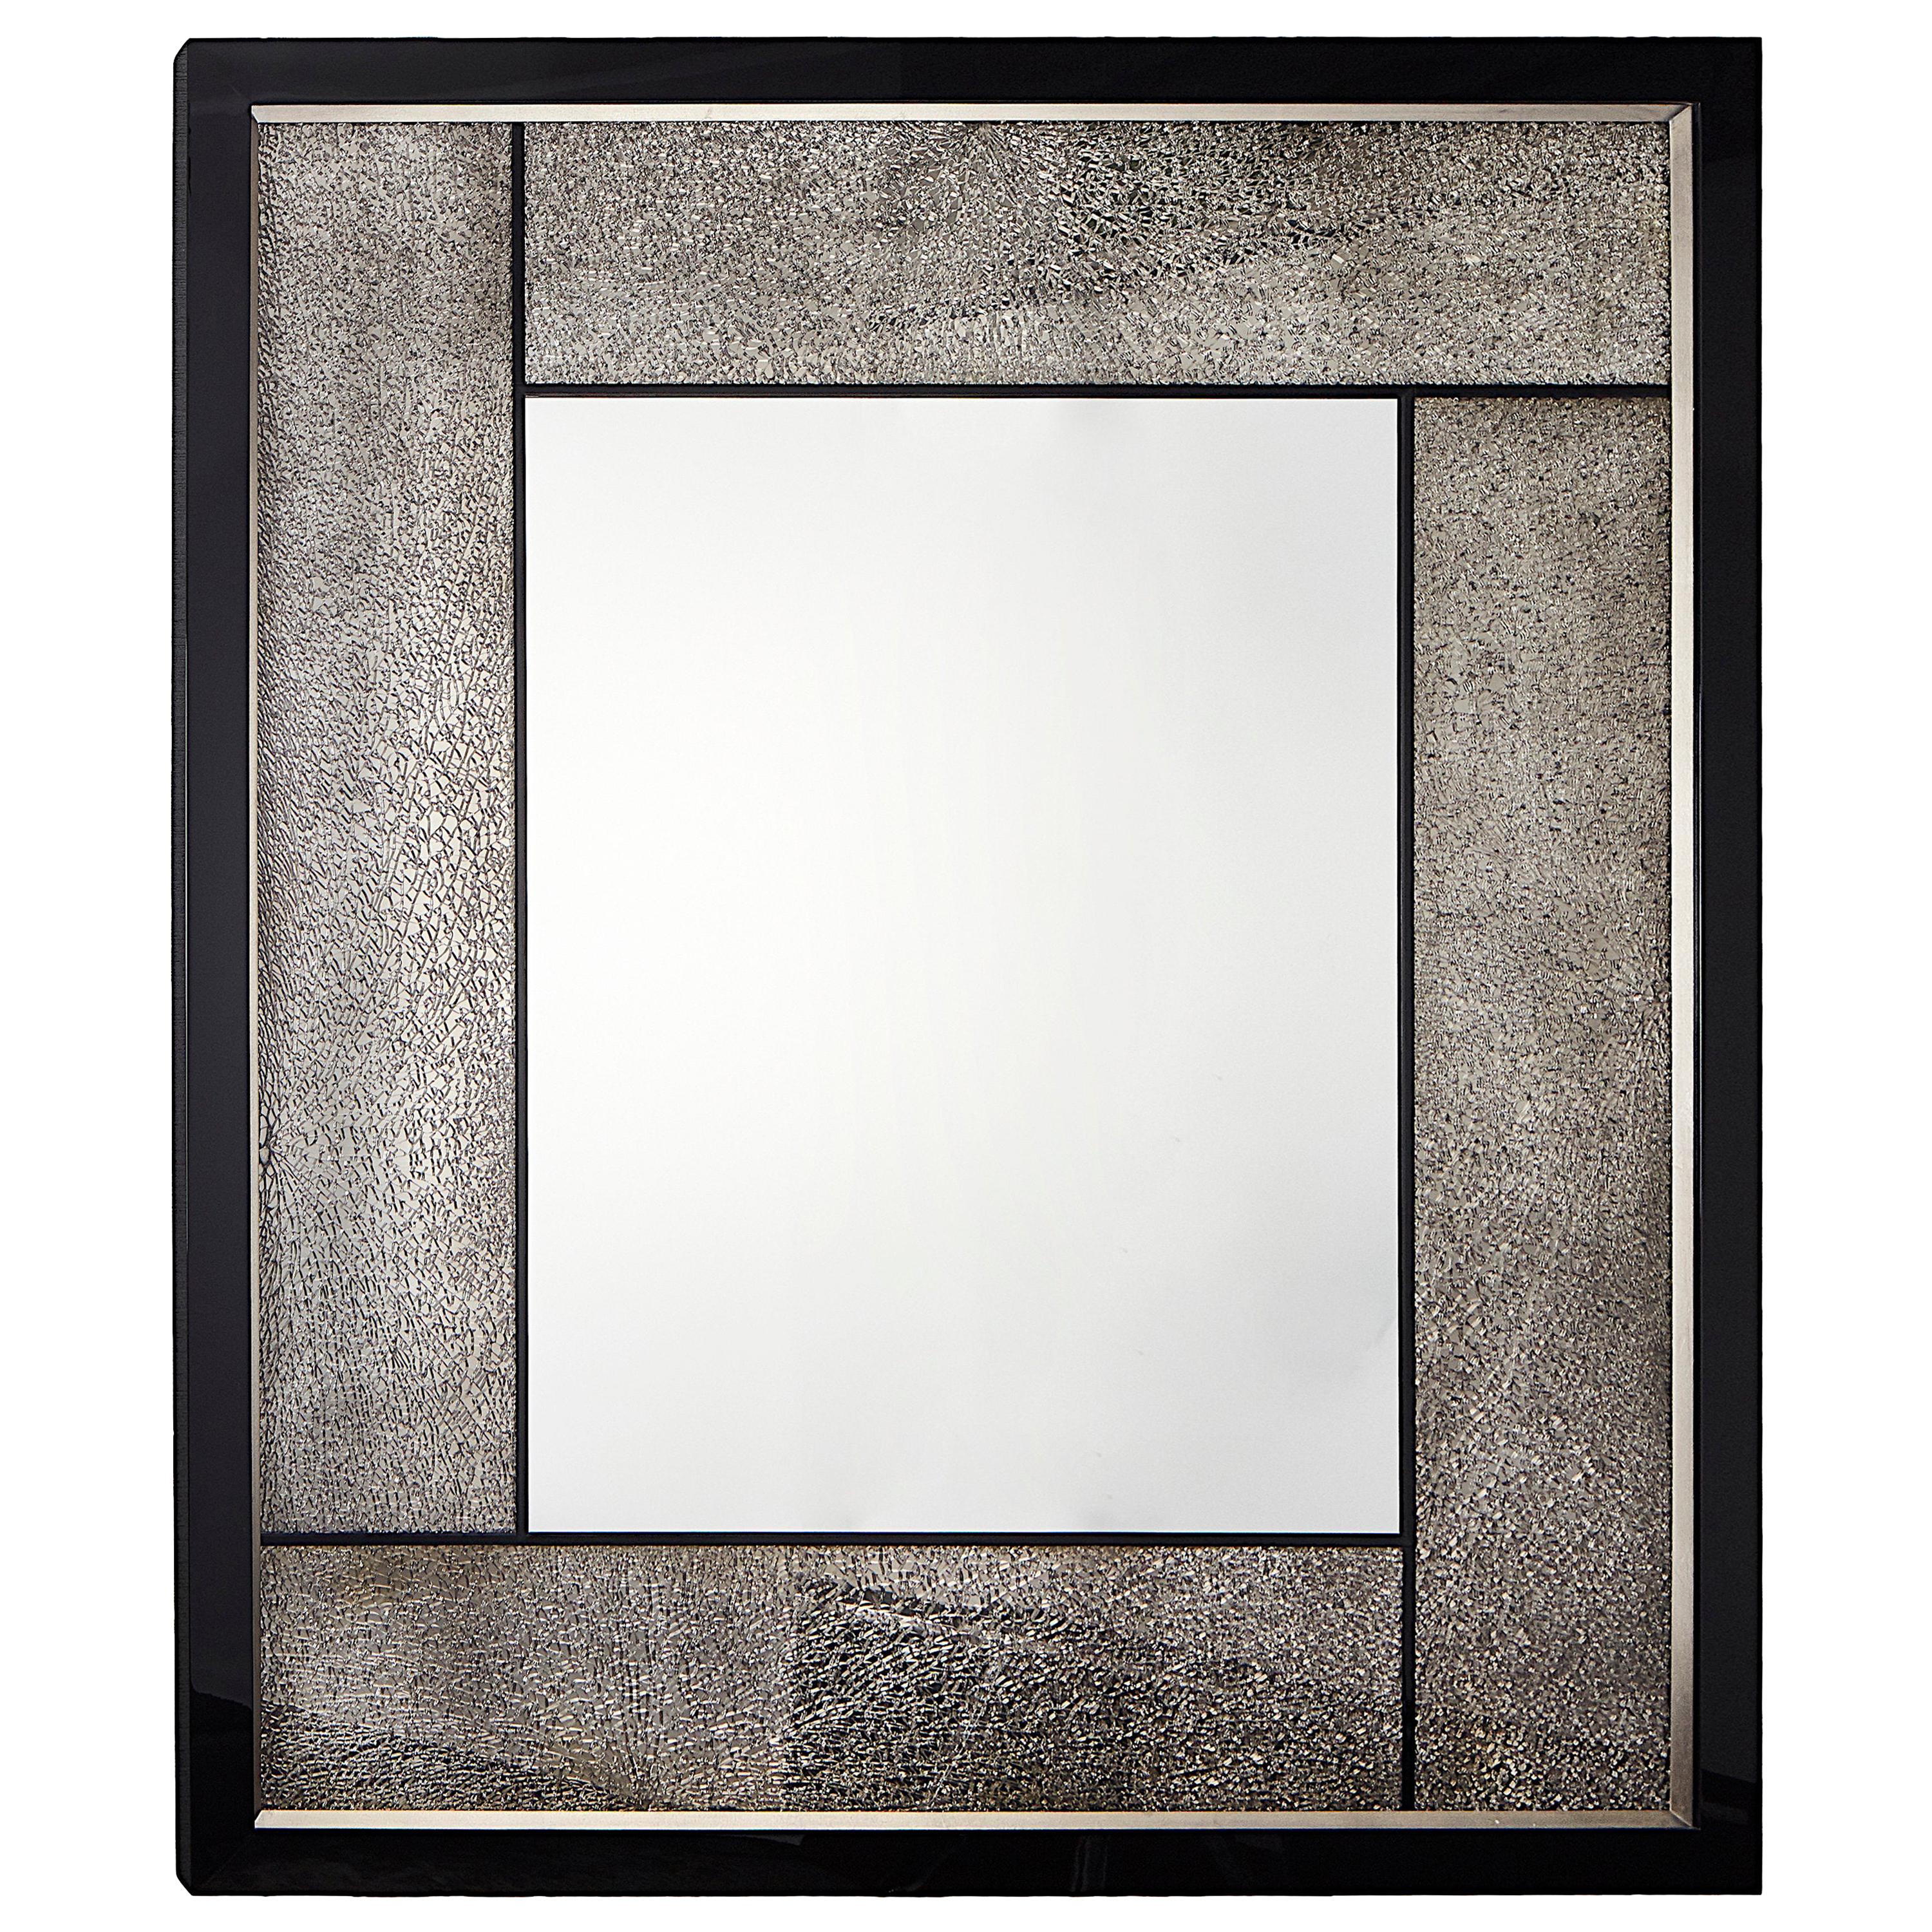 Big Mirror with Cracked Glass and Piano Black/Silver Frame, Available Now For Sale